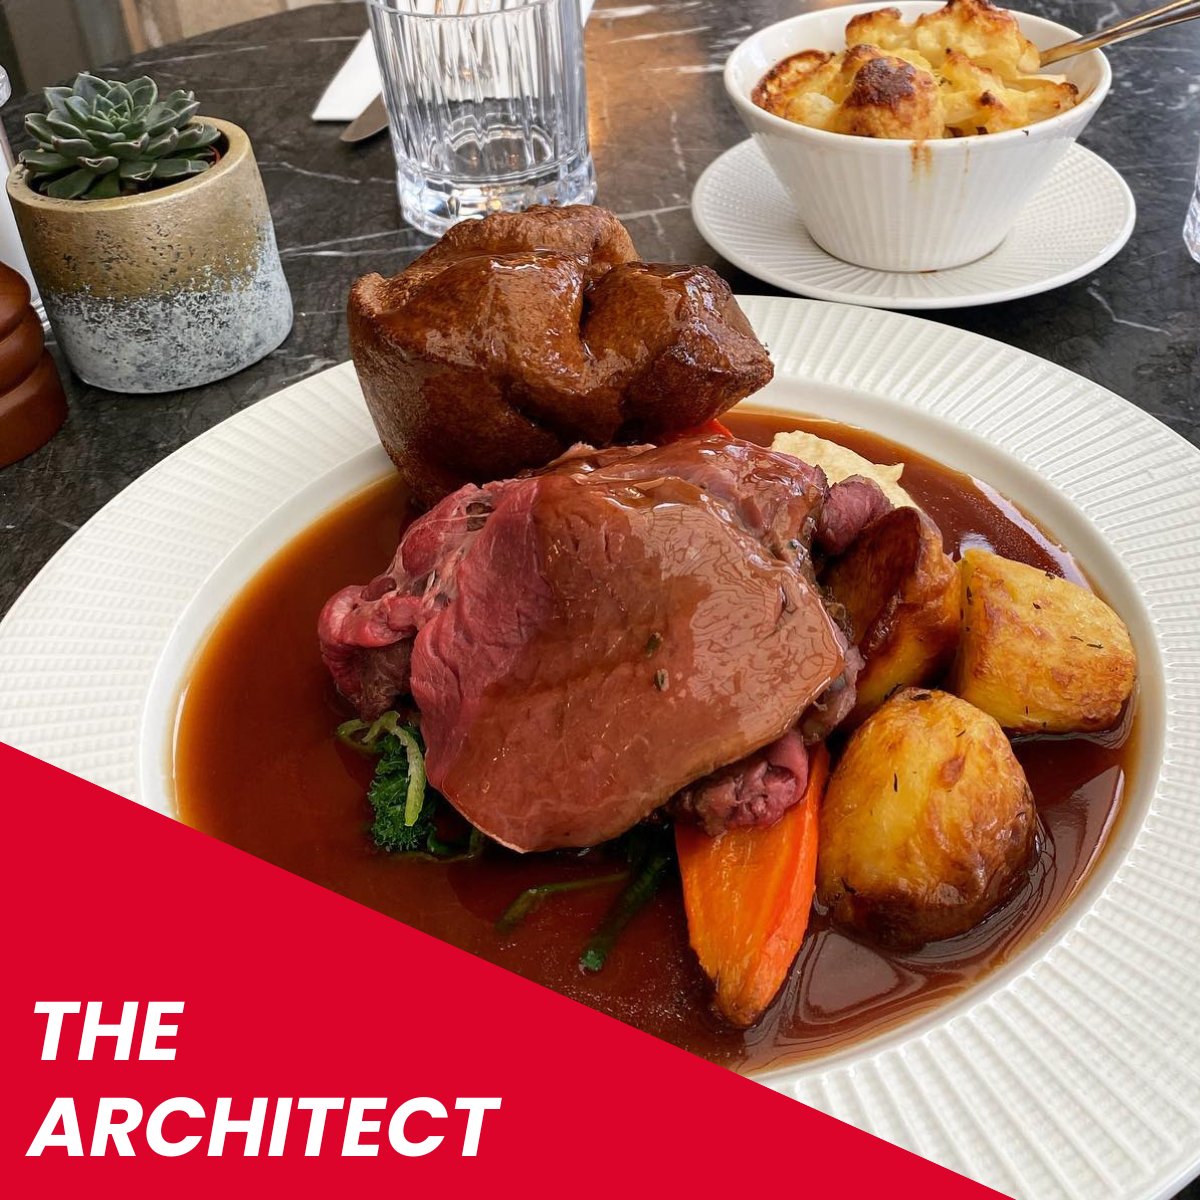 3 Must Visit Sunday Roast Spots in #Bath 🍴 Are you looking to find the best Sunday Roast in Bath? Here are three of our favourite places to dine for Sunday Lunch in Bath city centre! 1️⃣ @GreenParkBraz 2️⃣ @abbeyhotelbath 3️⃣ The Architect Bath ➡️ bit.ly/2pom2Q0